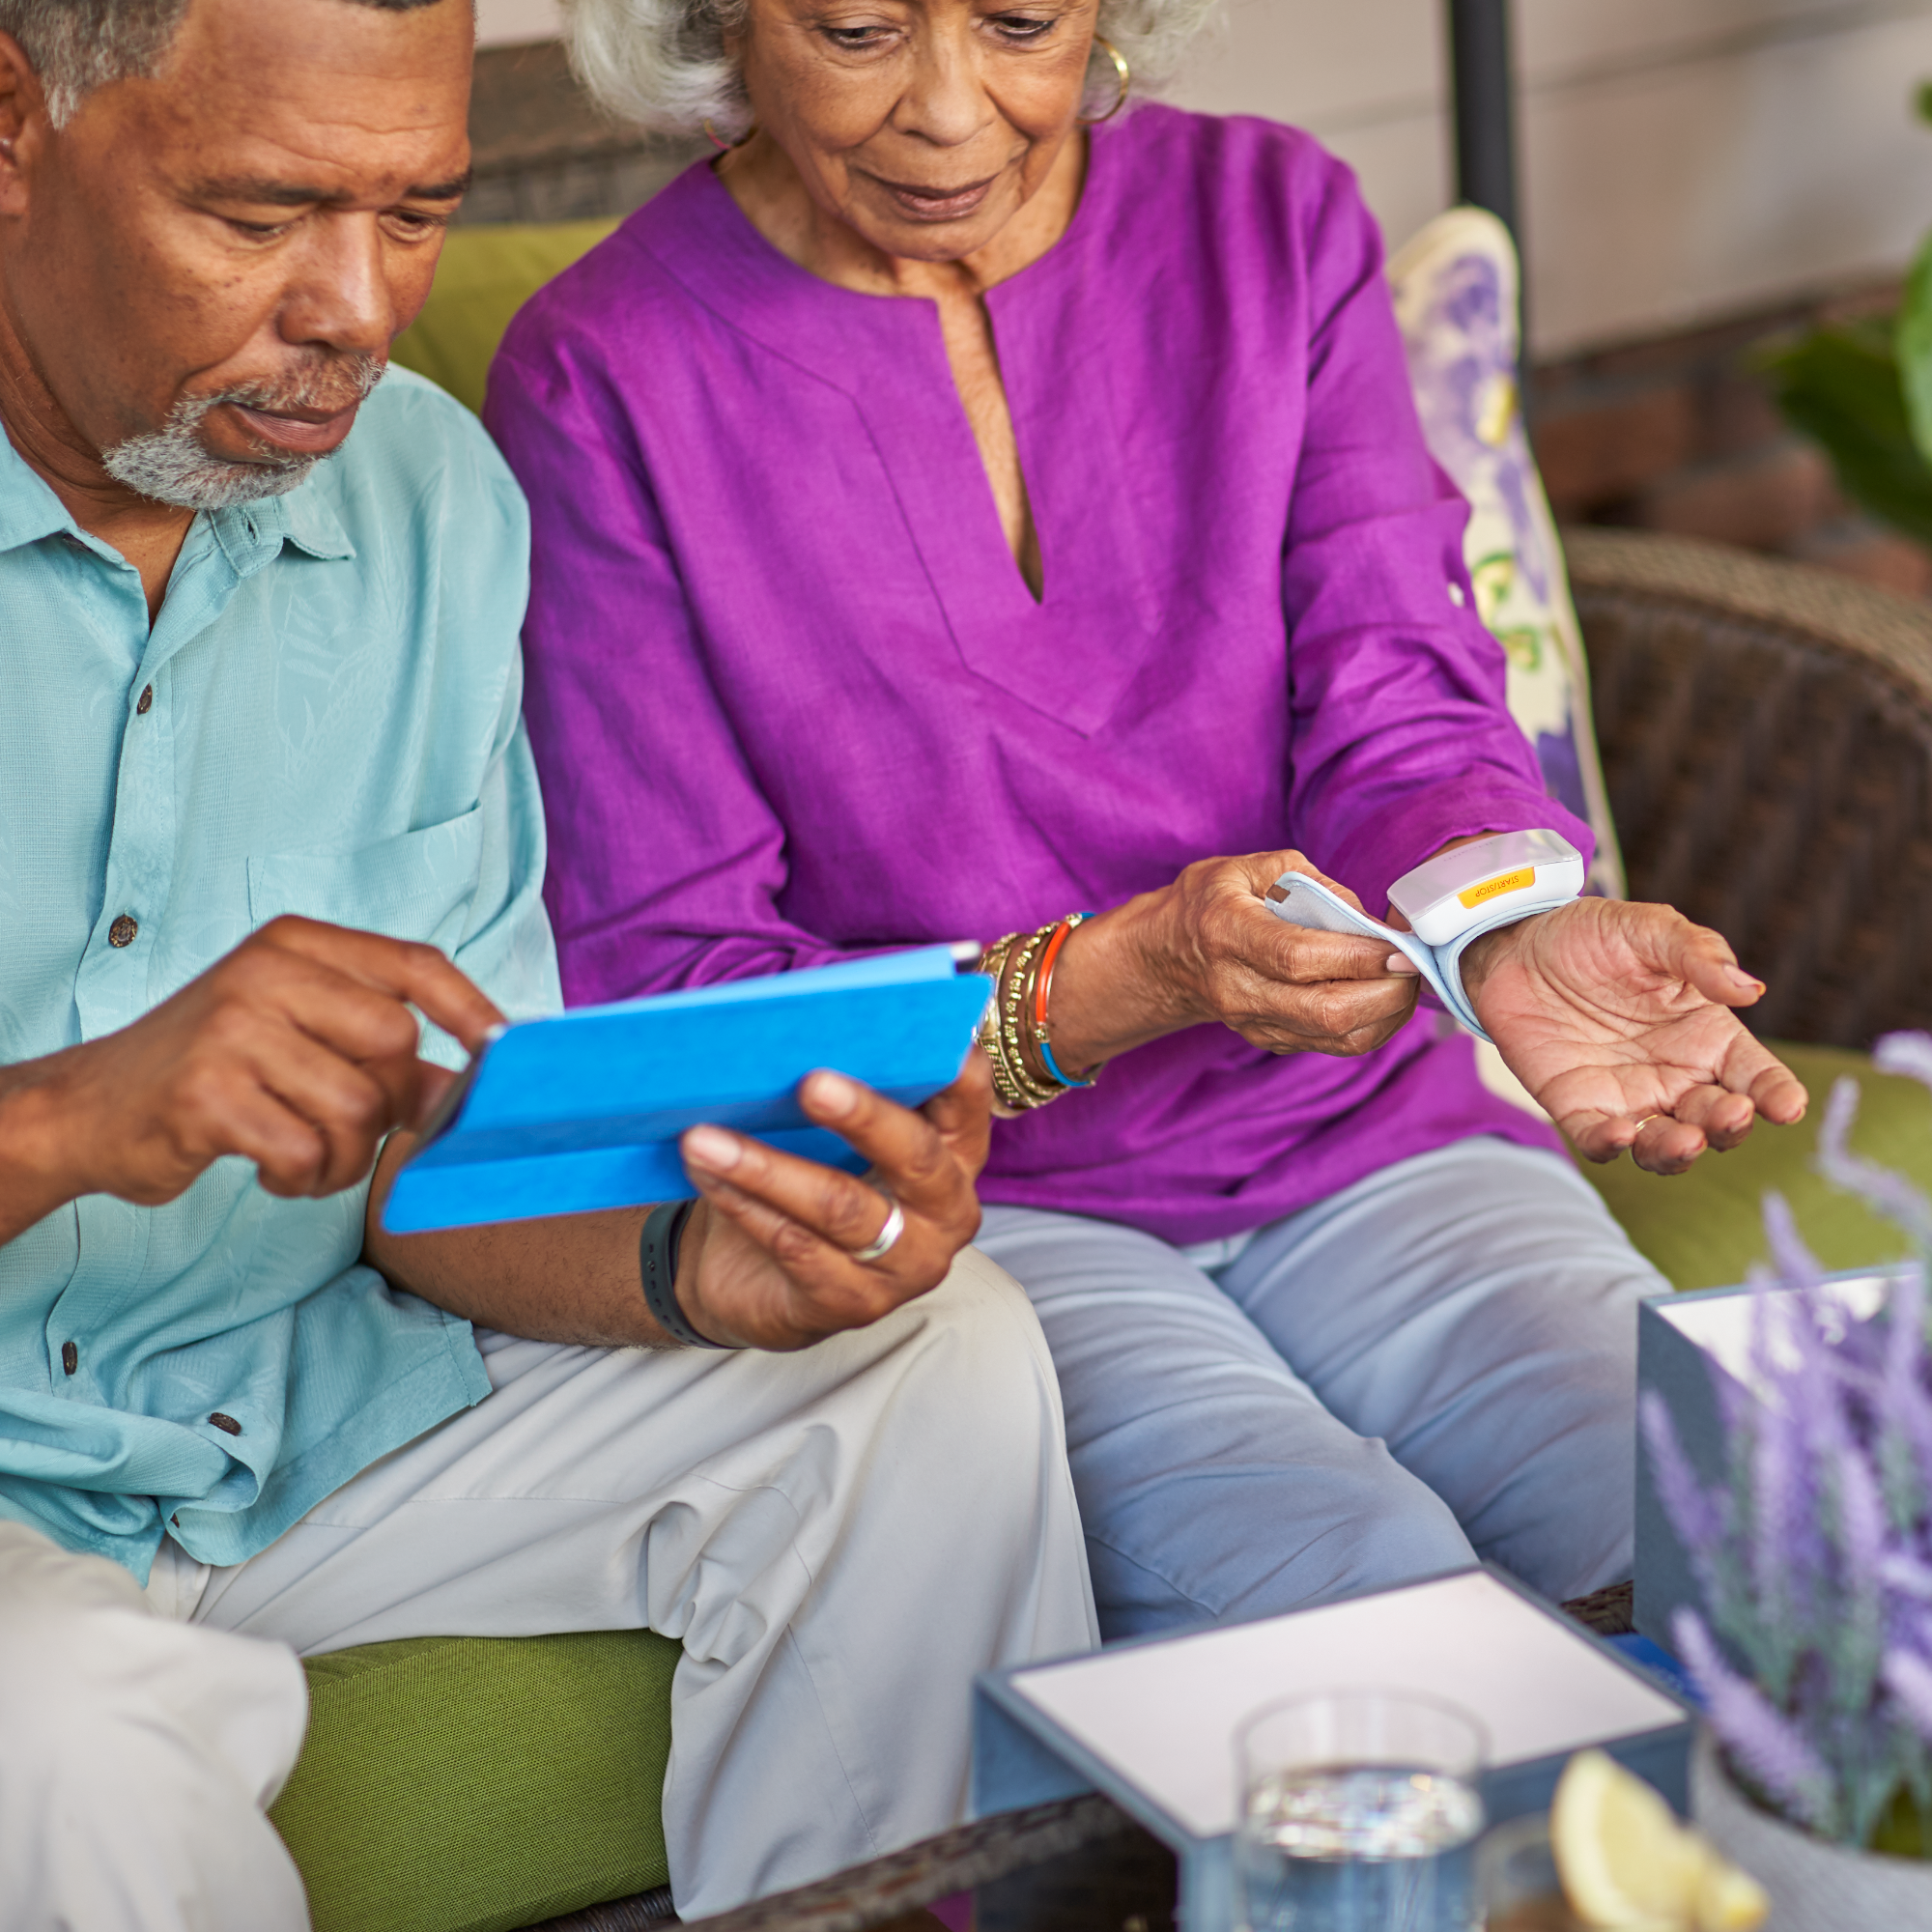 Two adults sitting side by side. One person is applying a medical device to their wrist, the other is looking at a handheld tablet device.